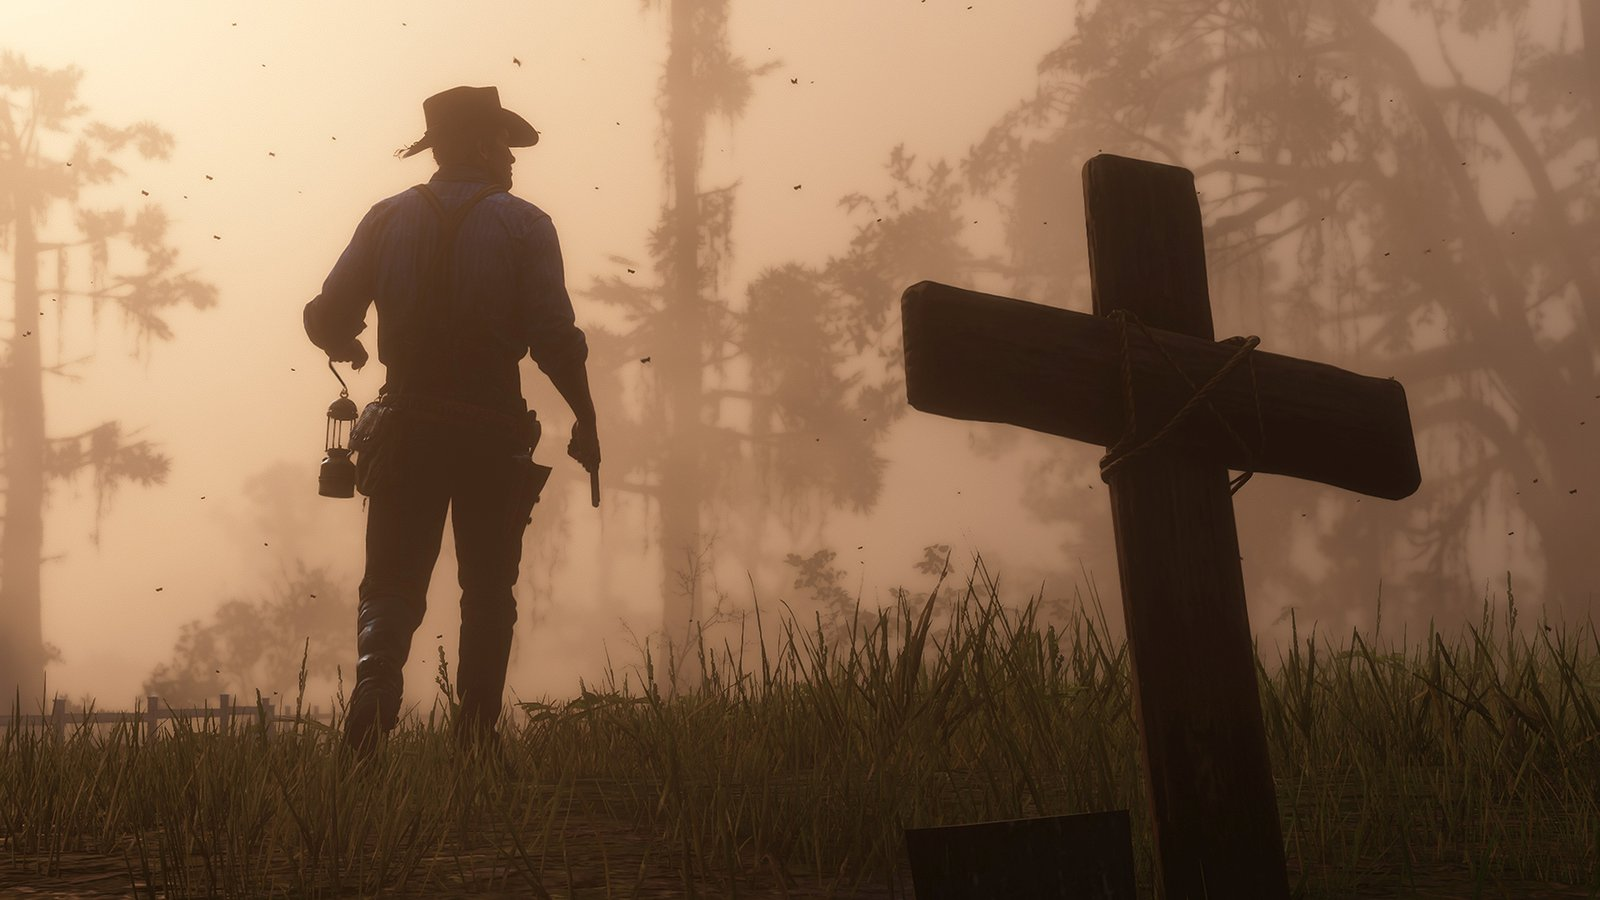 Red Dead Redemption 2's stuttering issues have a workaround in 1.14 patch